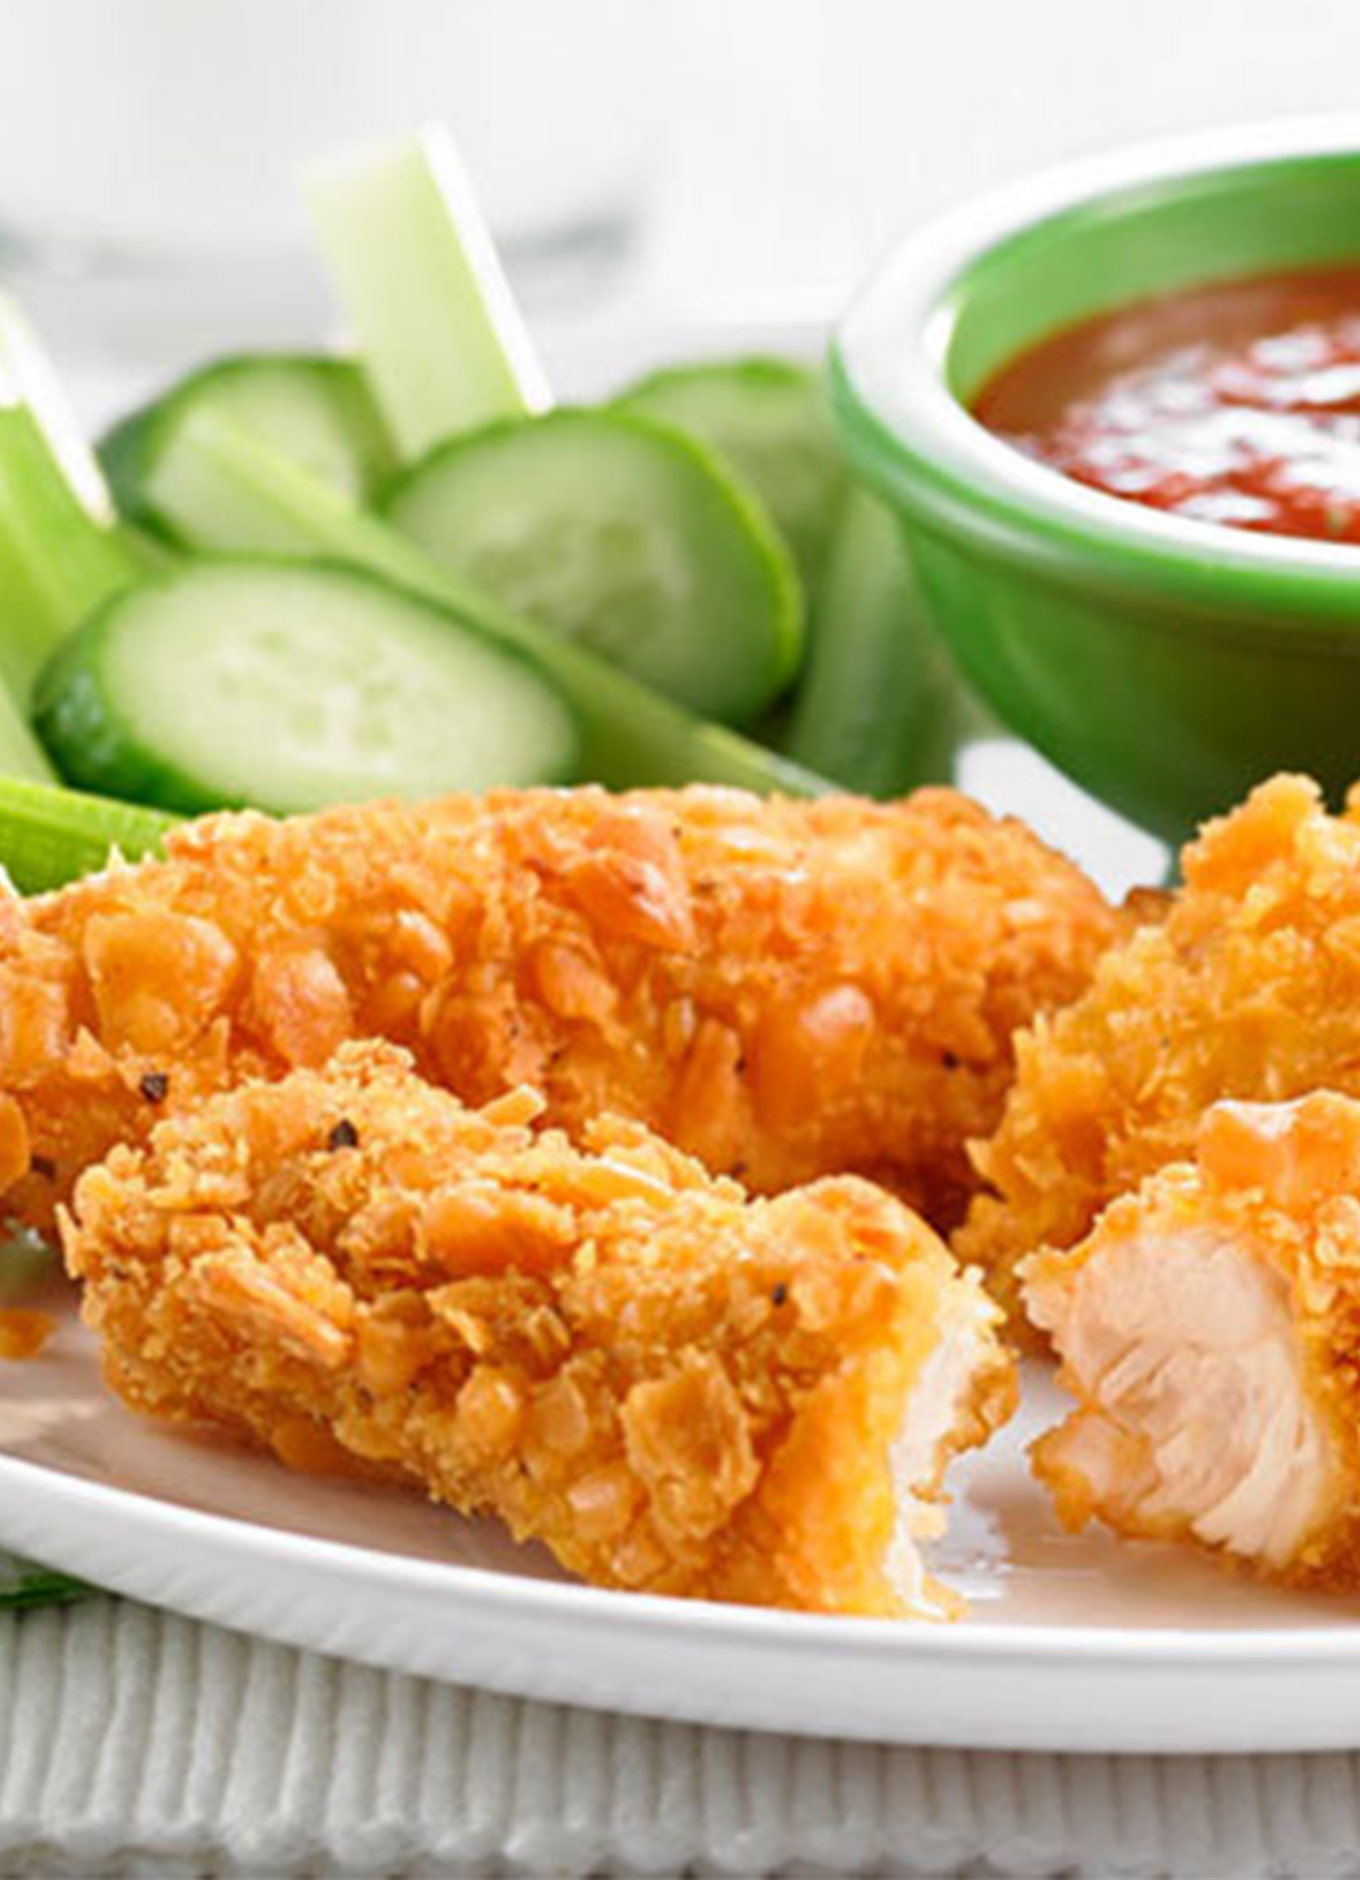 A plate of Chicken strips coated with cheesy fish crackers, served with fresh veggies and dipping sauce